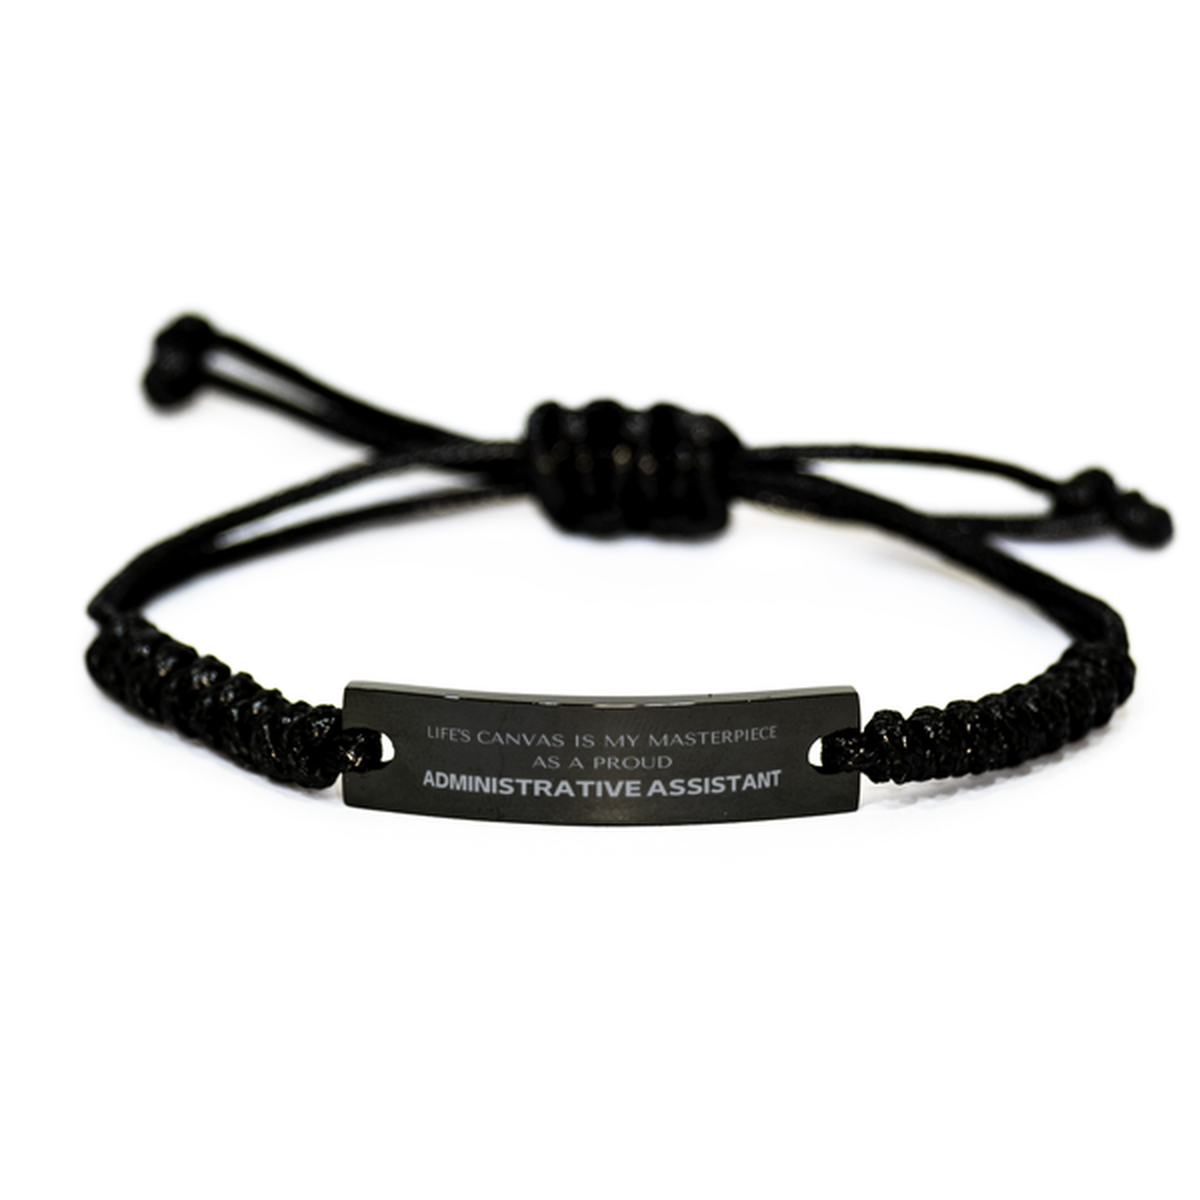 Proud Administrative Assistant Gifts, Life's canvas is my masterpiece, Epic Birthday Christmas Unique Black Rope Bracelet For Administrative Assistant, Coworkers, Men, Women, Friends